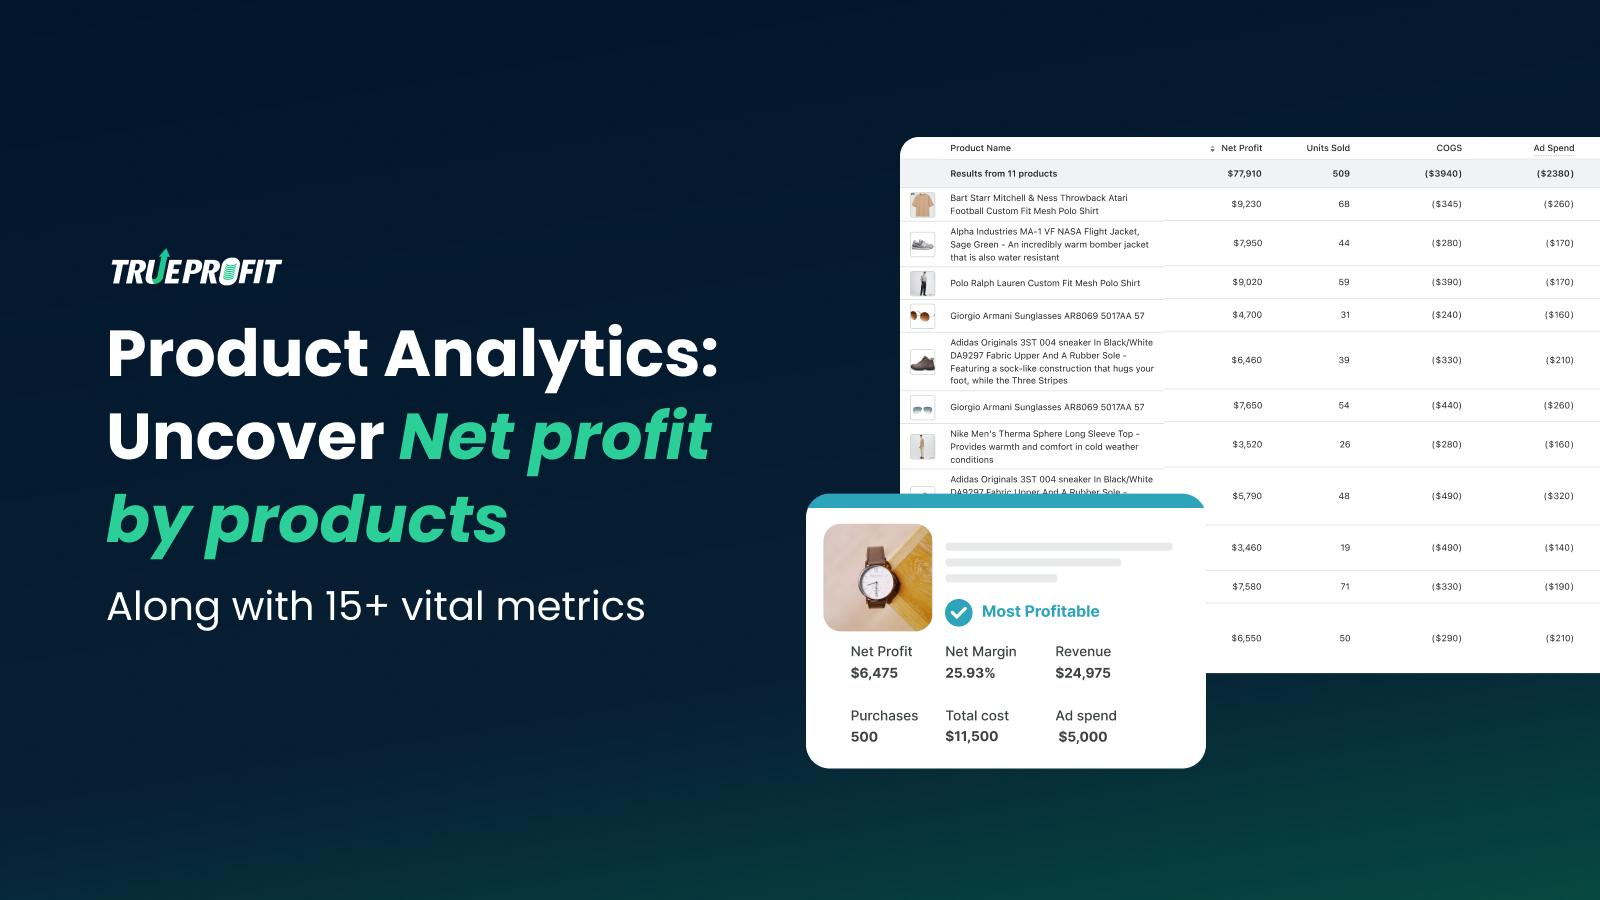 Product Analytics: Net profit, costs & ad spend by products